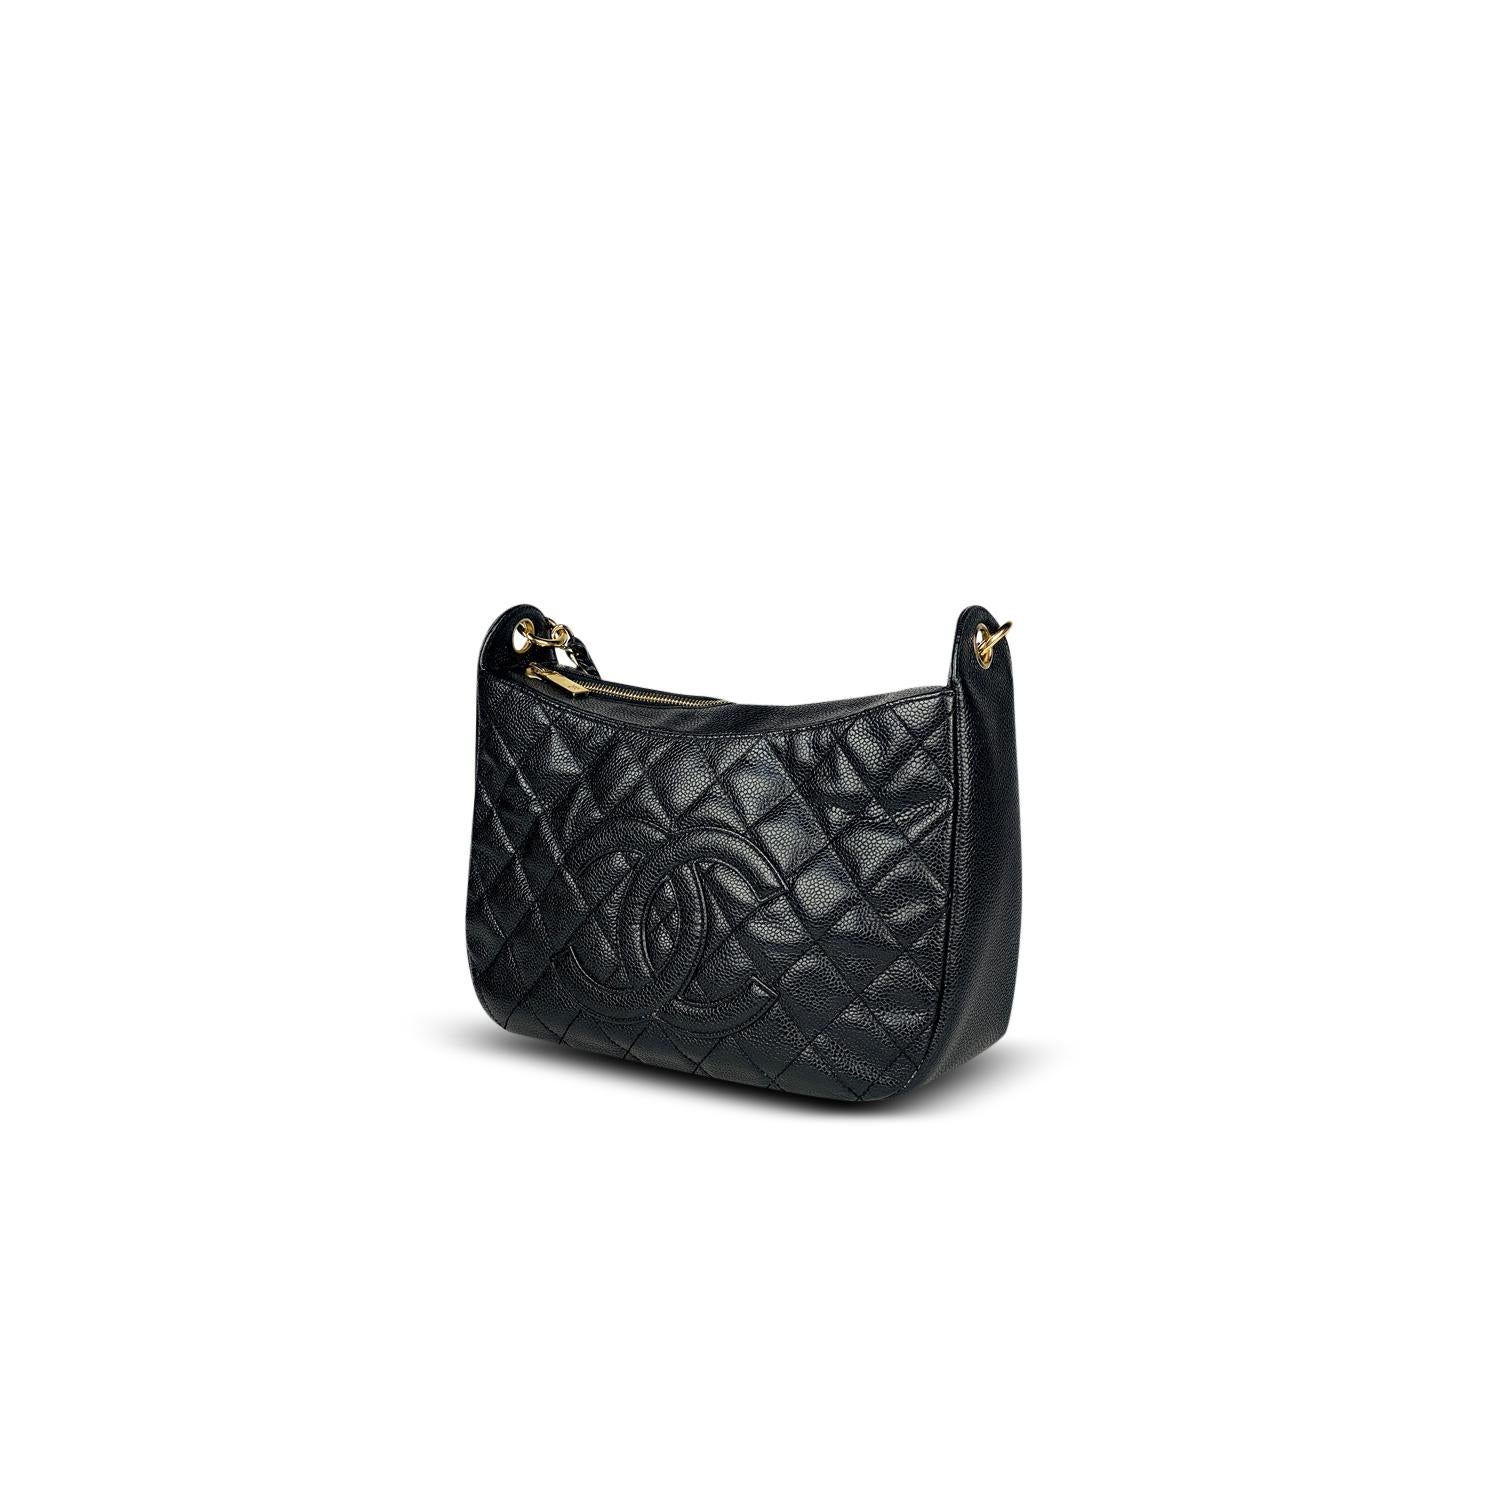 Black quilted Caviar leather Chanel Timeless shoulder bag with

– Gold-tone hardware
– single convertible chain-link and leather shoulder strap
– Dual slit pockets at exterior, tonal grosgrain lining, three pockets at interior wall; one with zip